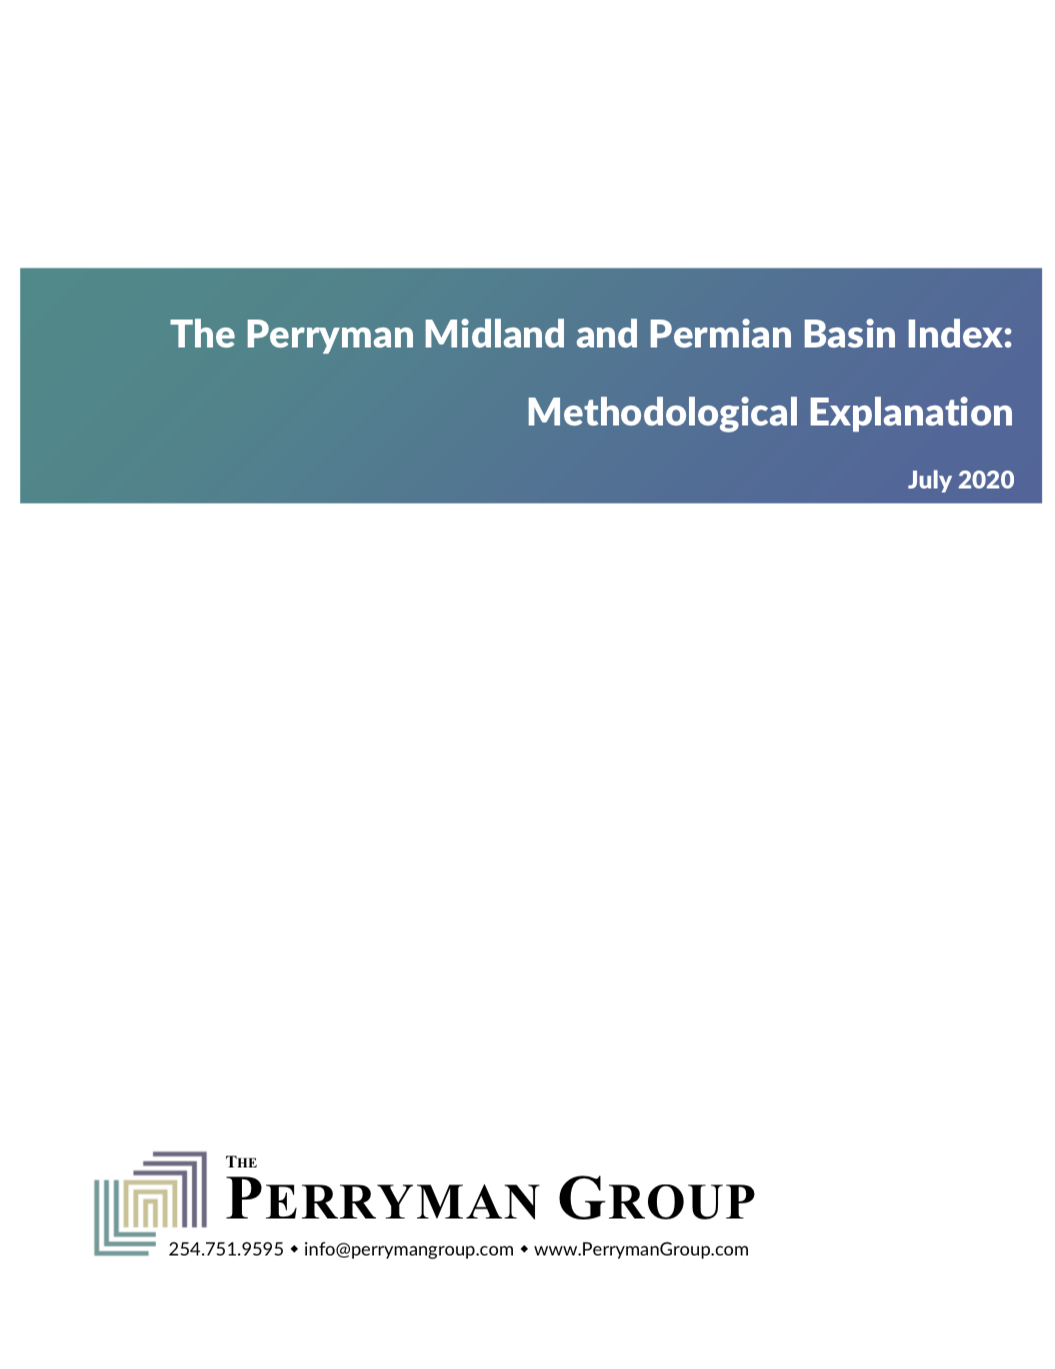 Thumbnail Image For The Perryman Midland and Permian Basin Index: Methodological Explanation